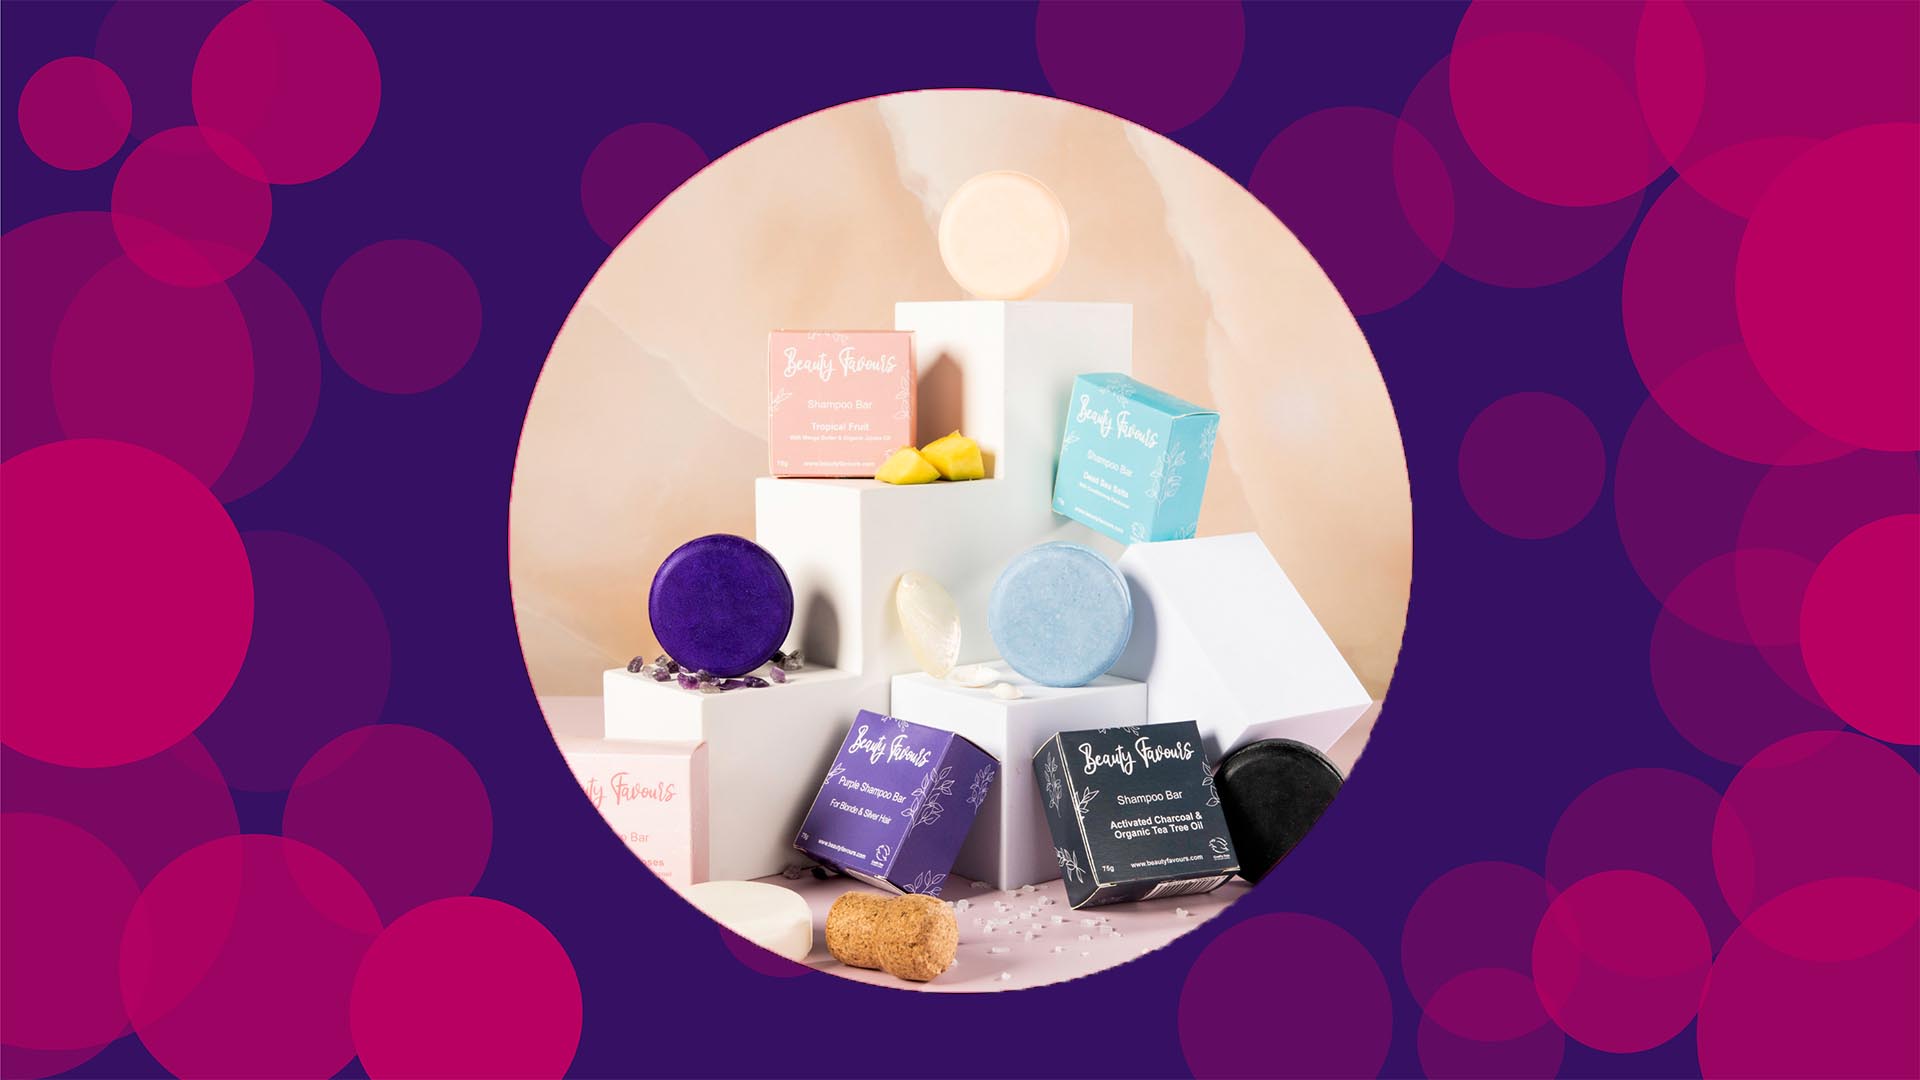 Purple background with pink circles, with an image in the middle of a set up of beauty favours different shampoo bars